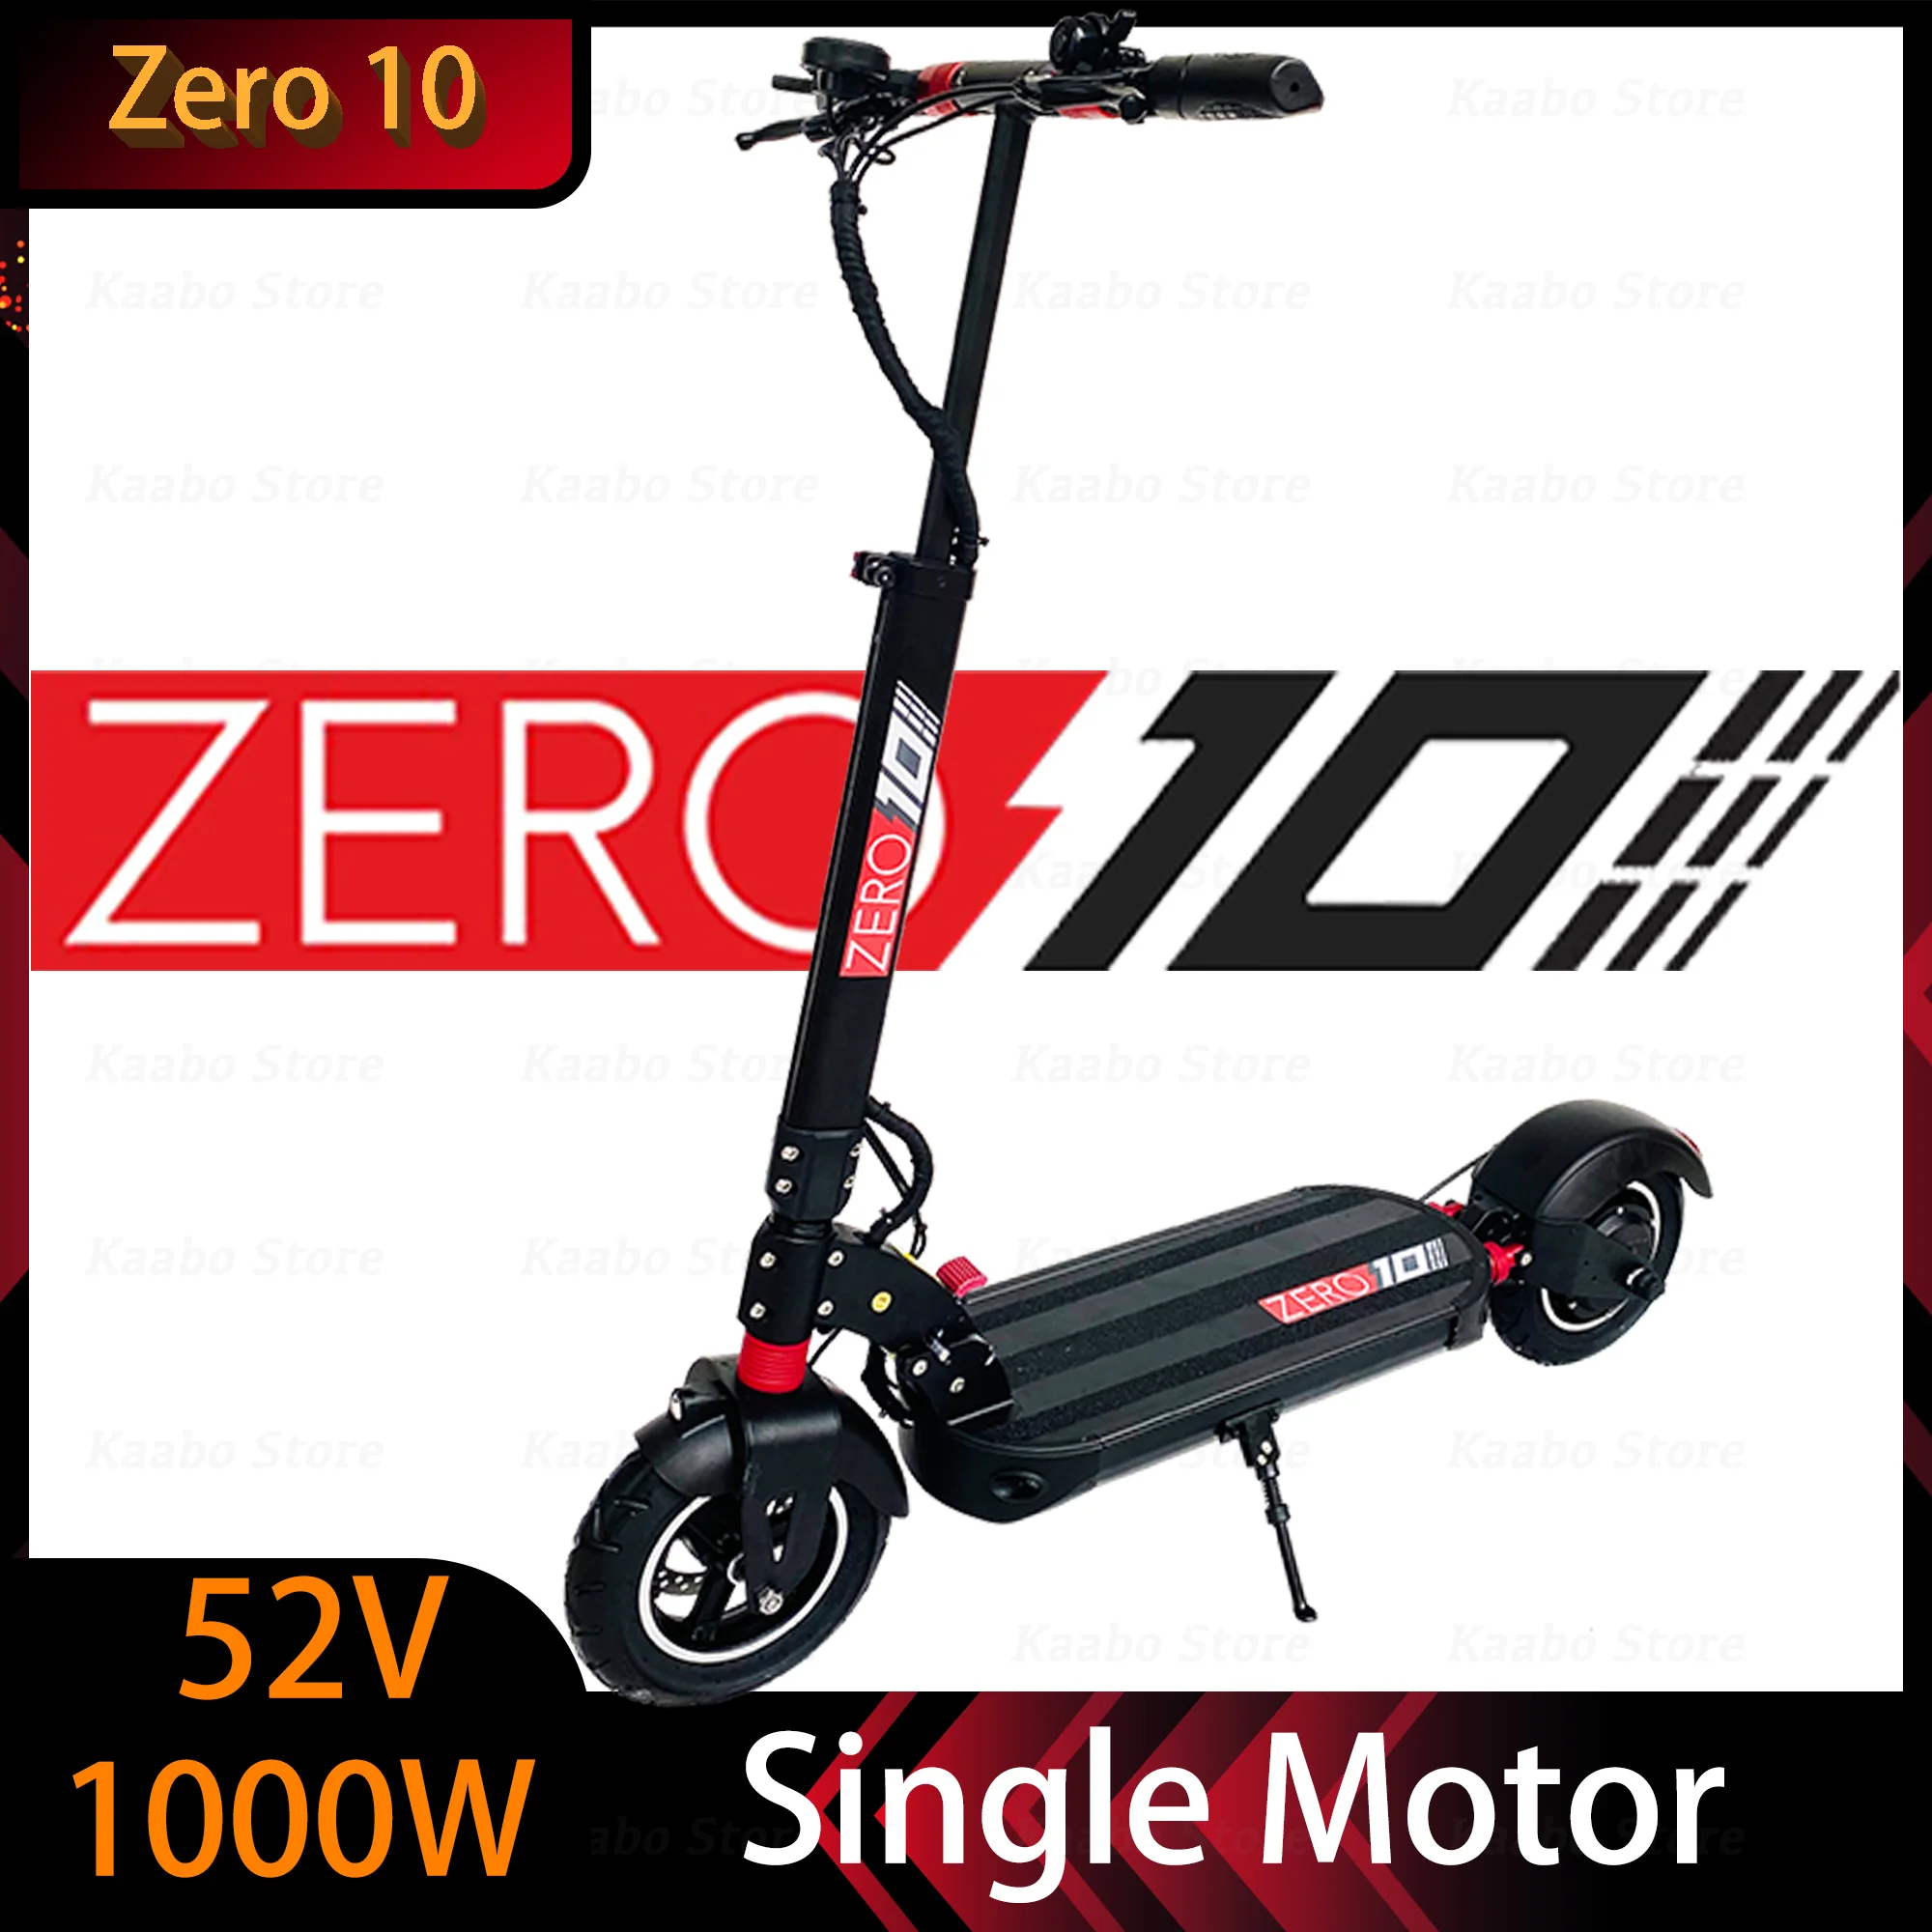 Electric | Electric Scooter Zero 10 | Electric Kick Scooter Zero 10 52v - Electric Scooters - Aliexpress